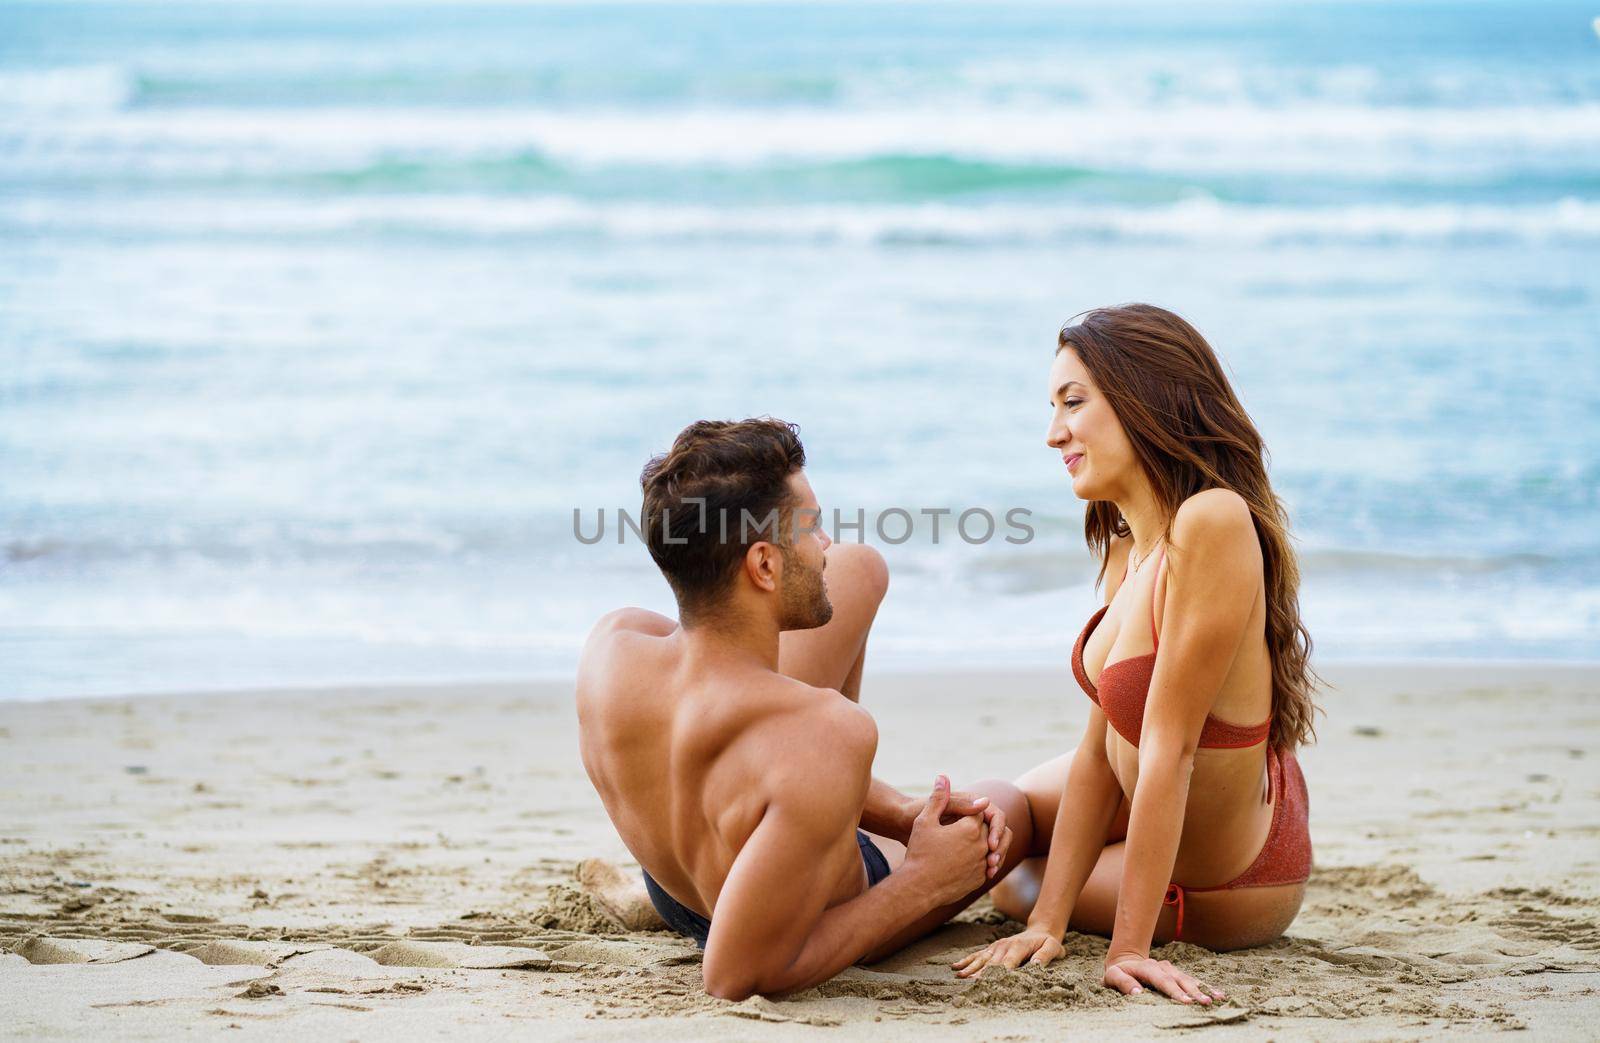 Cheerful loving woman in bikini and man in shorts sitting on shore in summer and looking at each other